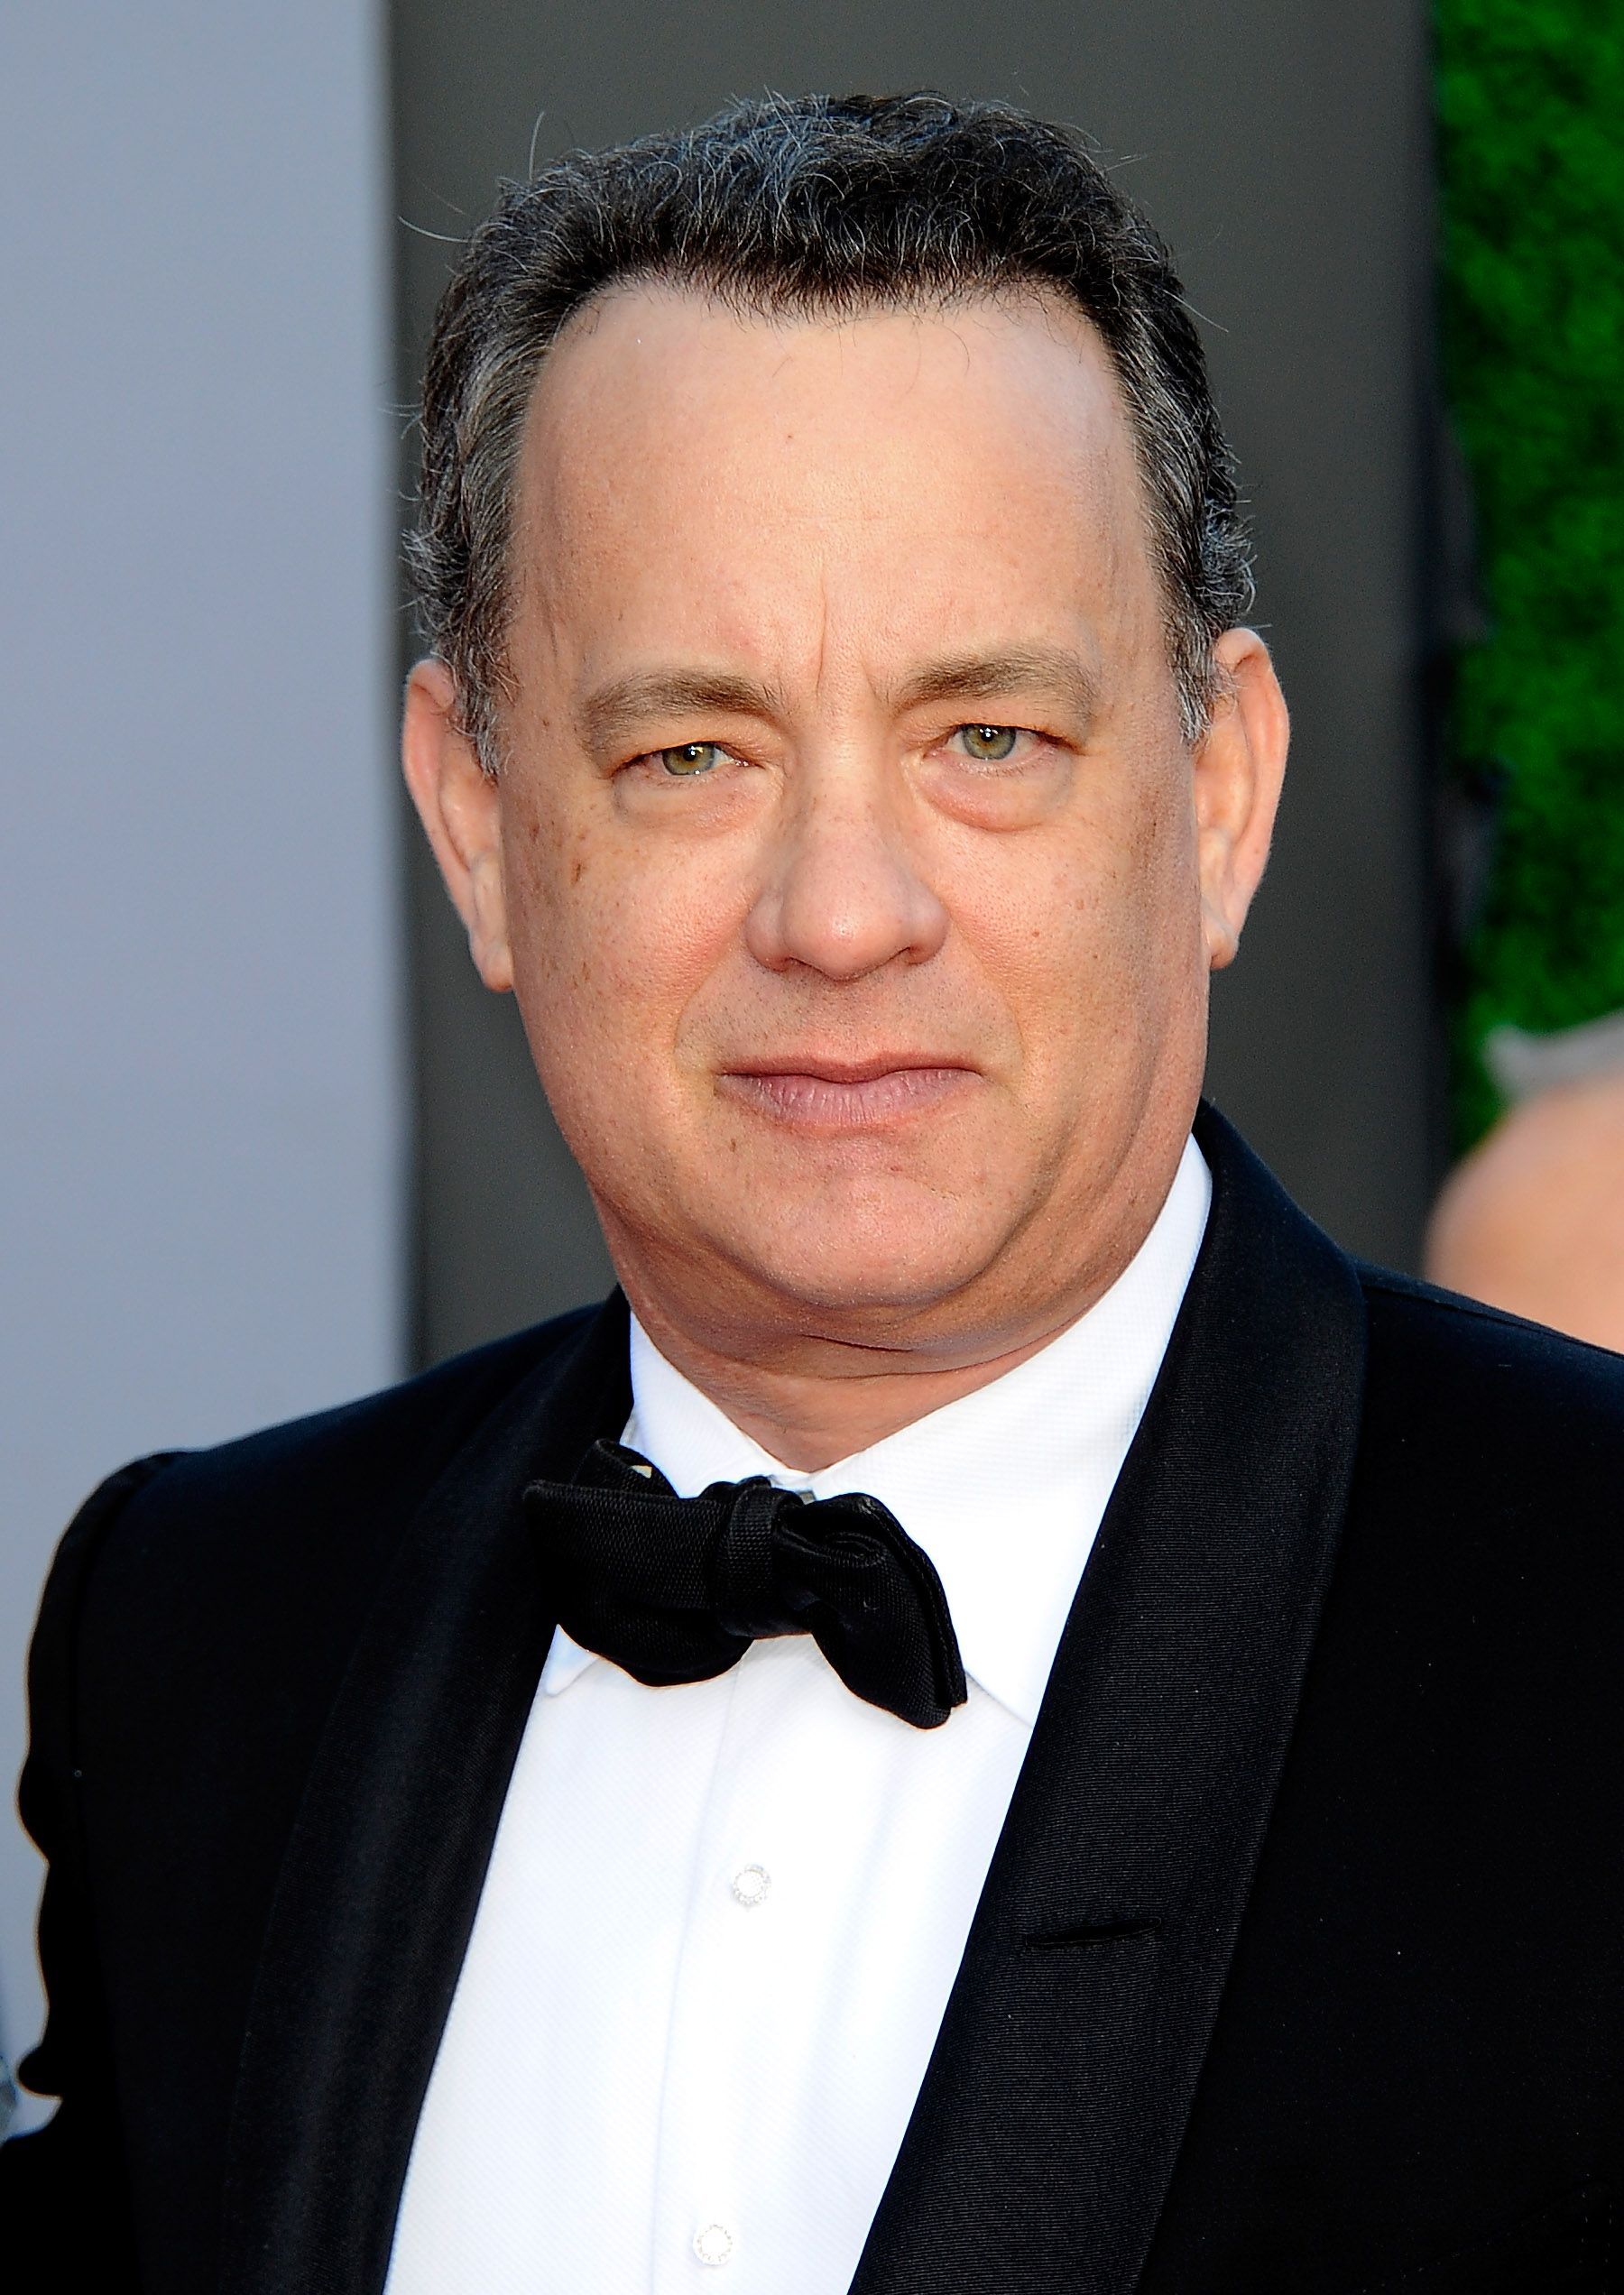 Tom Hanks during the BAFTA Brits To Watch event held at the Belasco Theatre on July 9, 2011 in Los Angeles, California. | Source: Getty Images